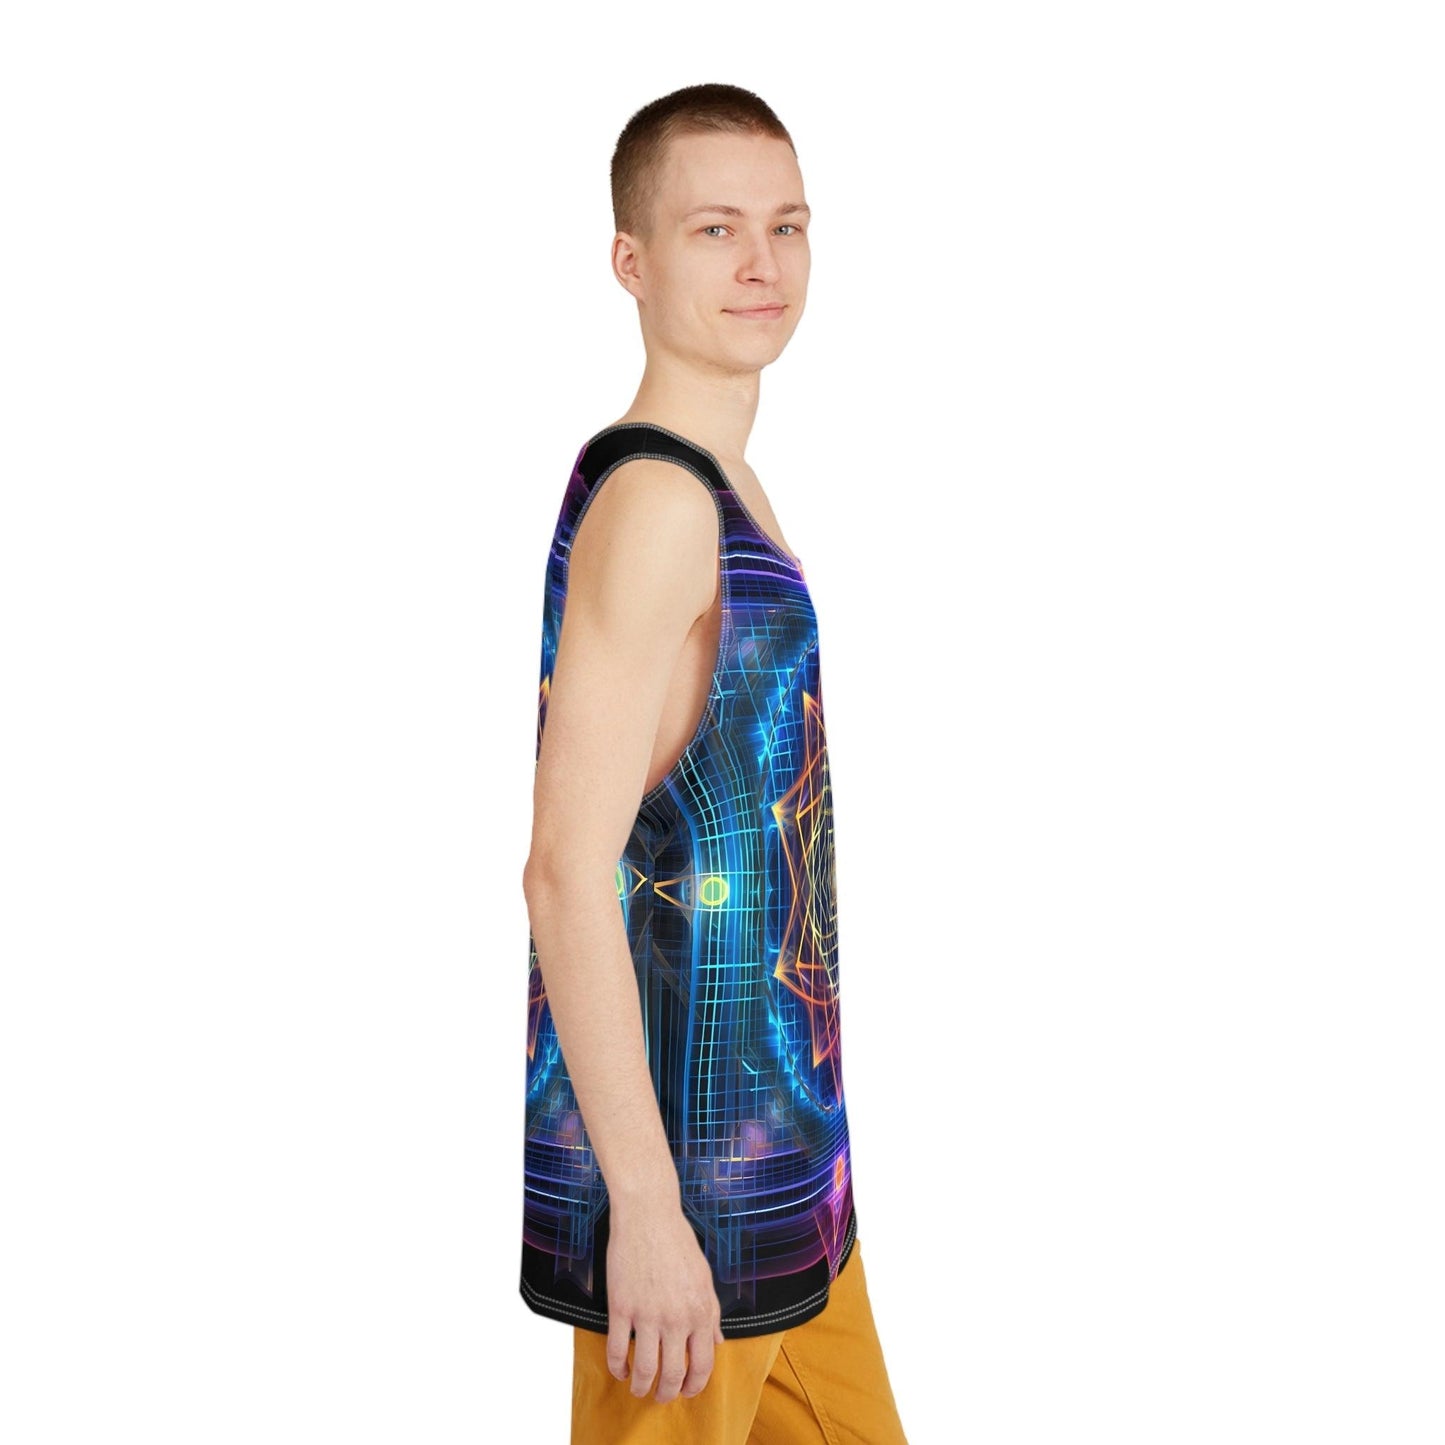 Sri Yantra 3D Sacred Geometry Octane Colorful Symmetrical Sublimation Tank Top for Him - Stylish Comfort for Festival Street Activewear and More - Alchemystics.org